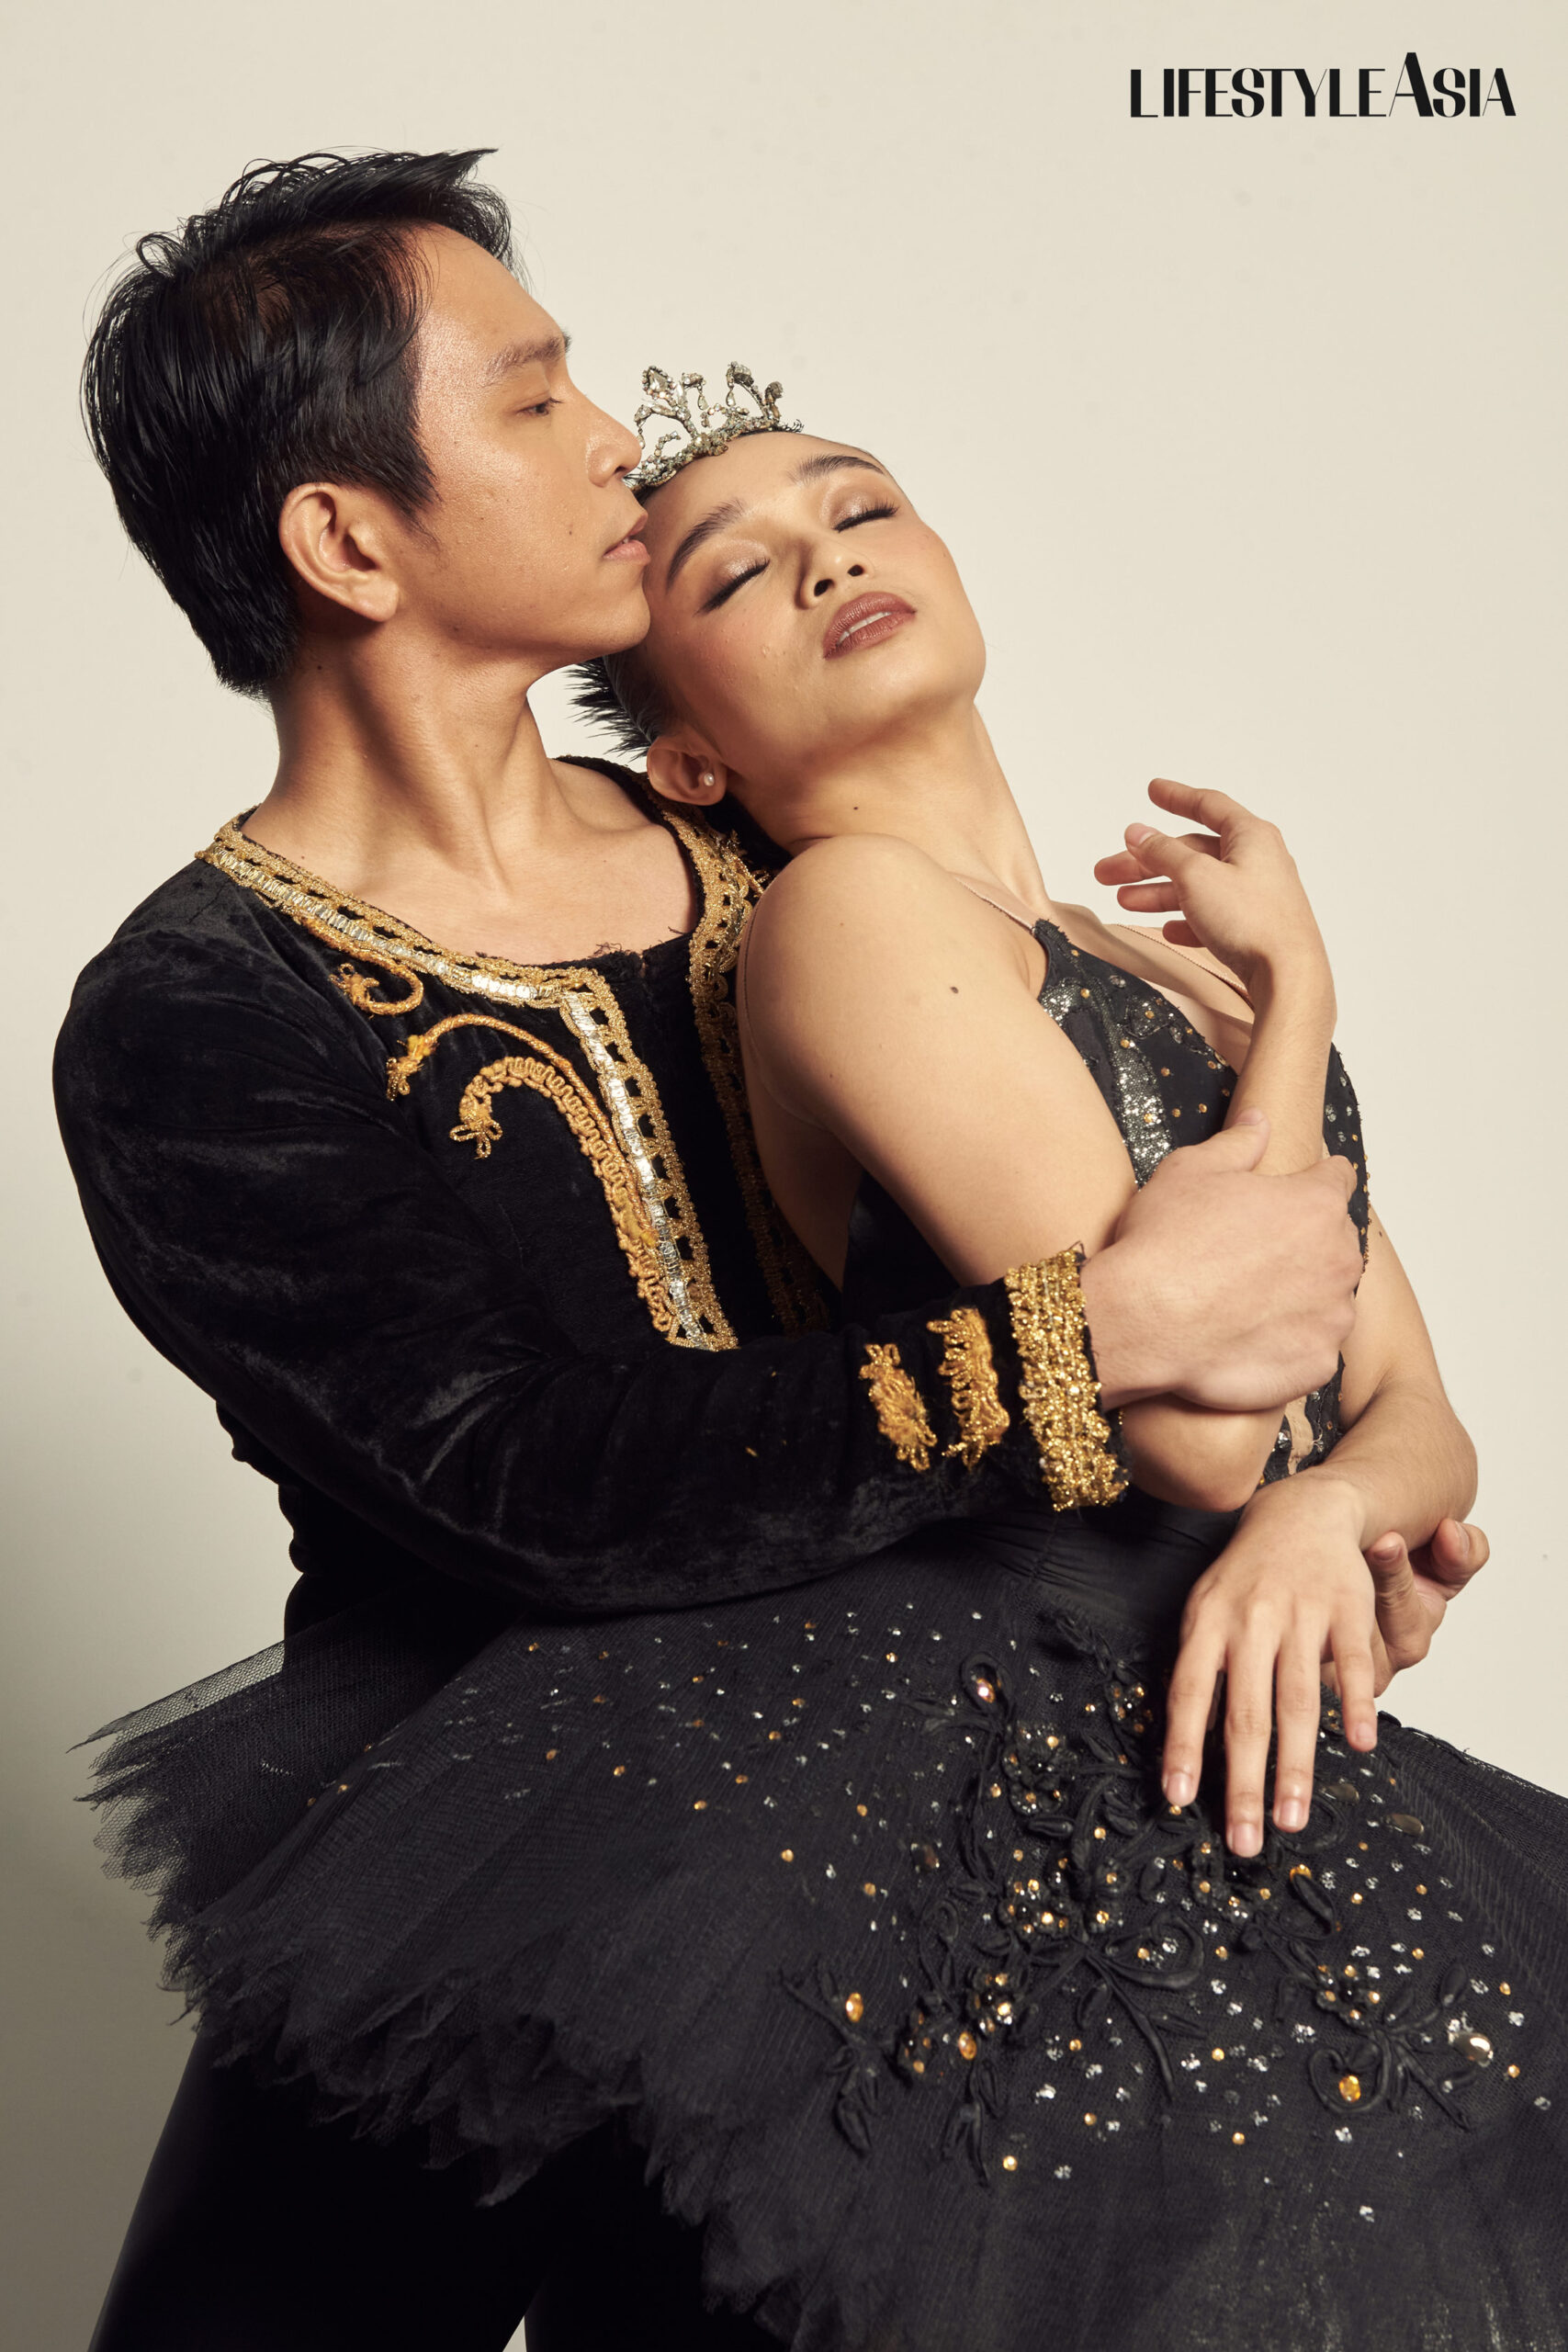 Ian Ocampo and Jemima Reyes of Ballet Philippines